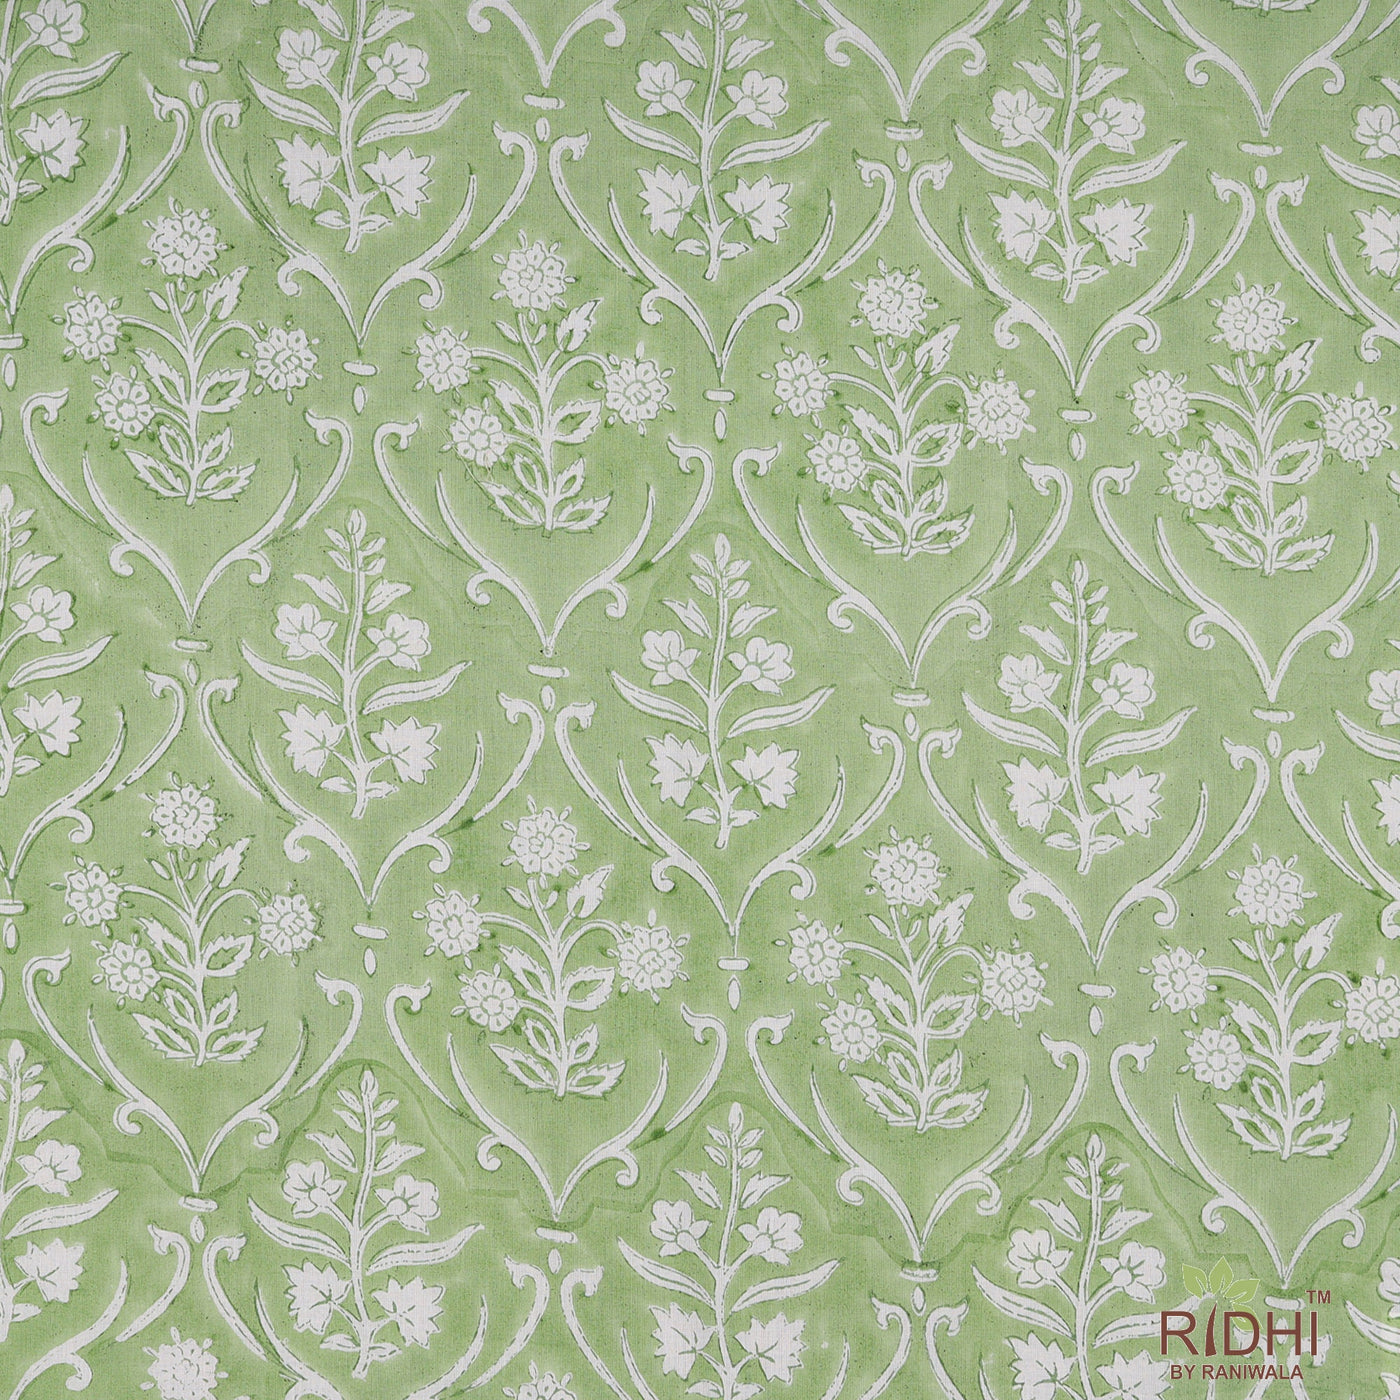 Sage Green and White Indian Floral Hand Block Floral Printed Pure Cotton Cloth Napkins, 18x18"- Cocktail Napkins, 20x20"- Dinner Napkins